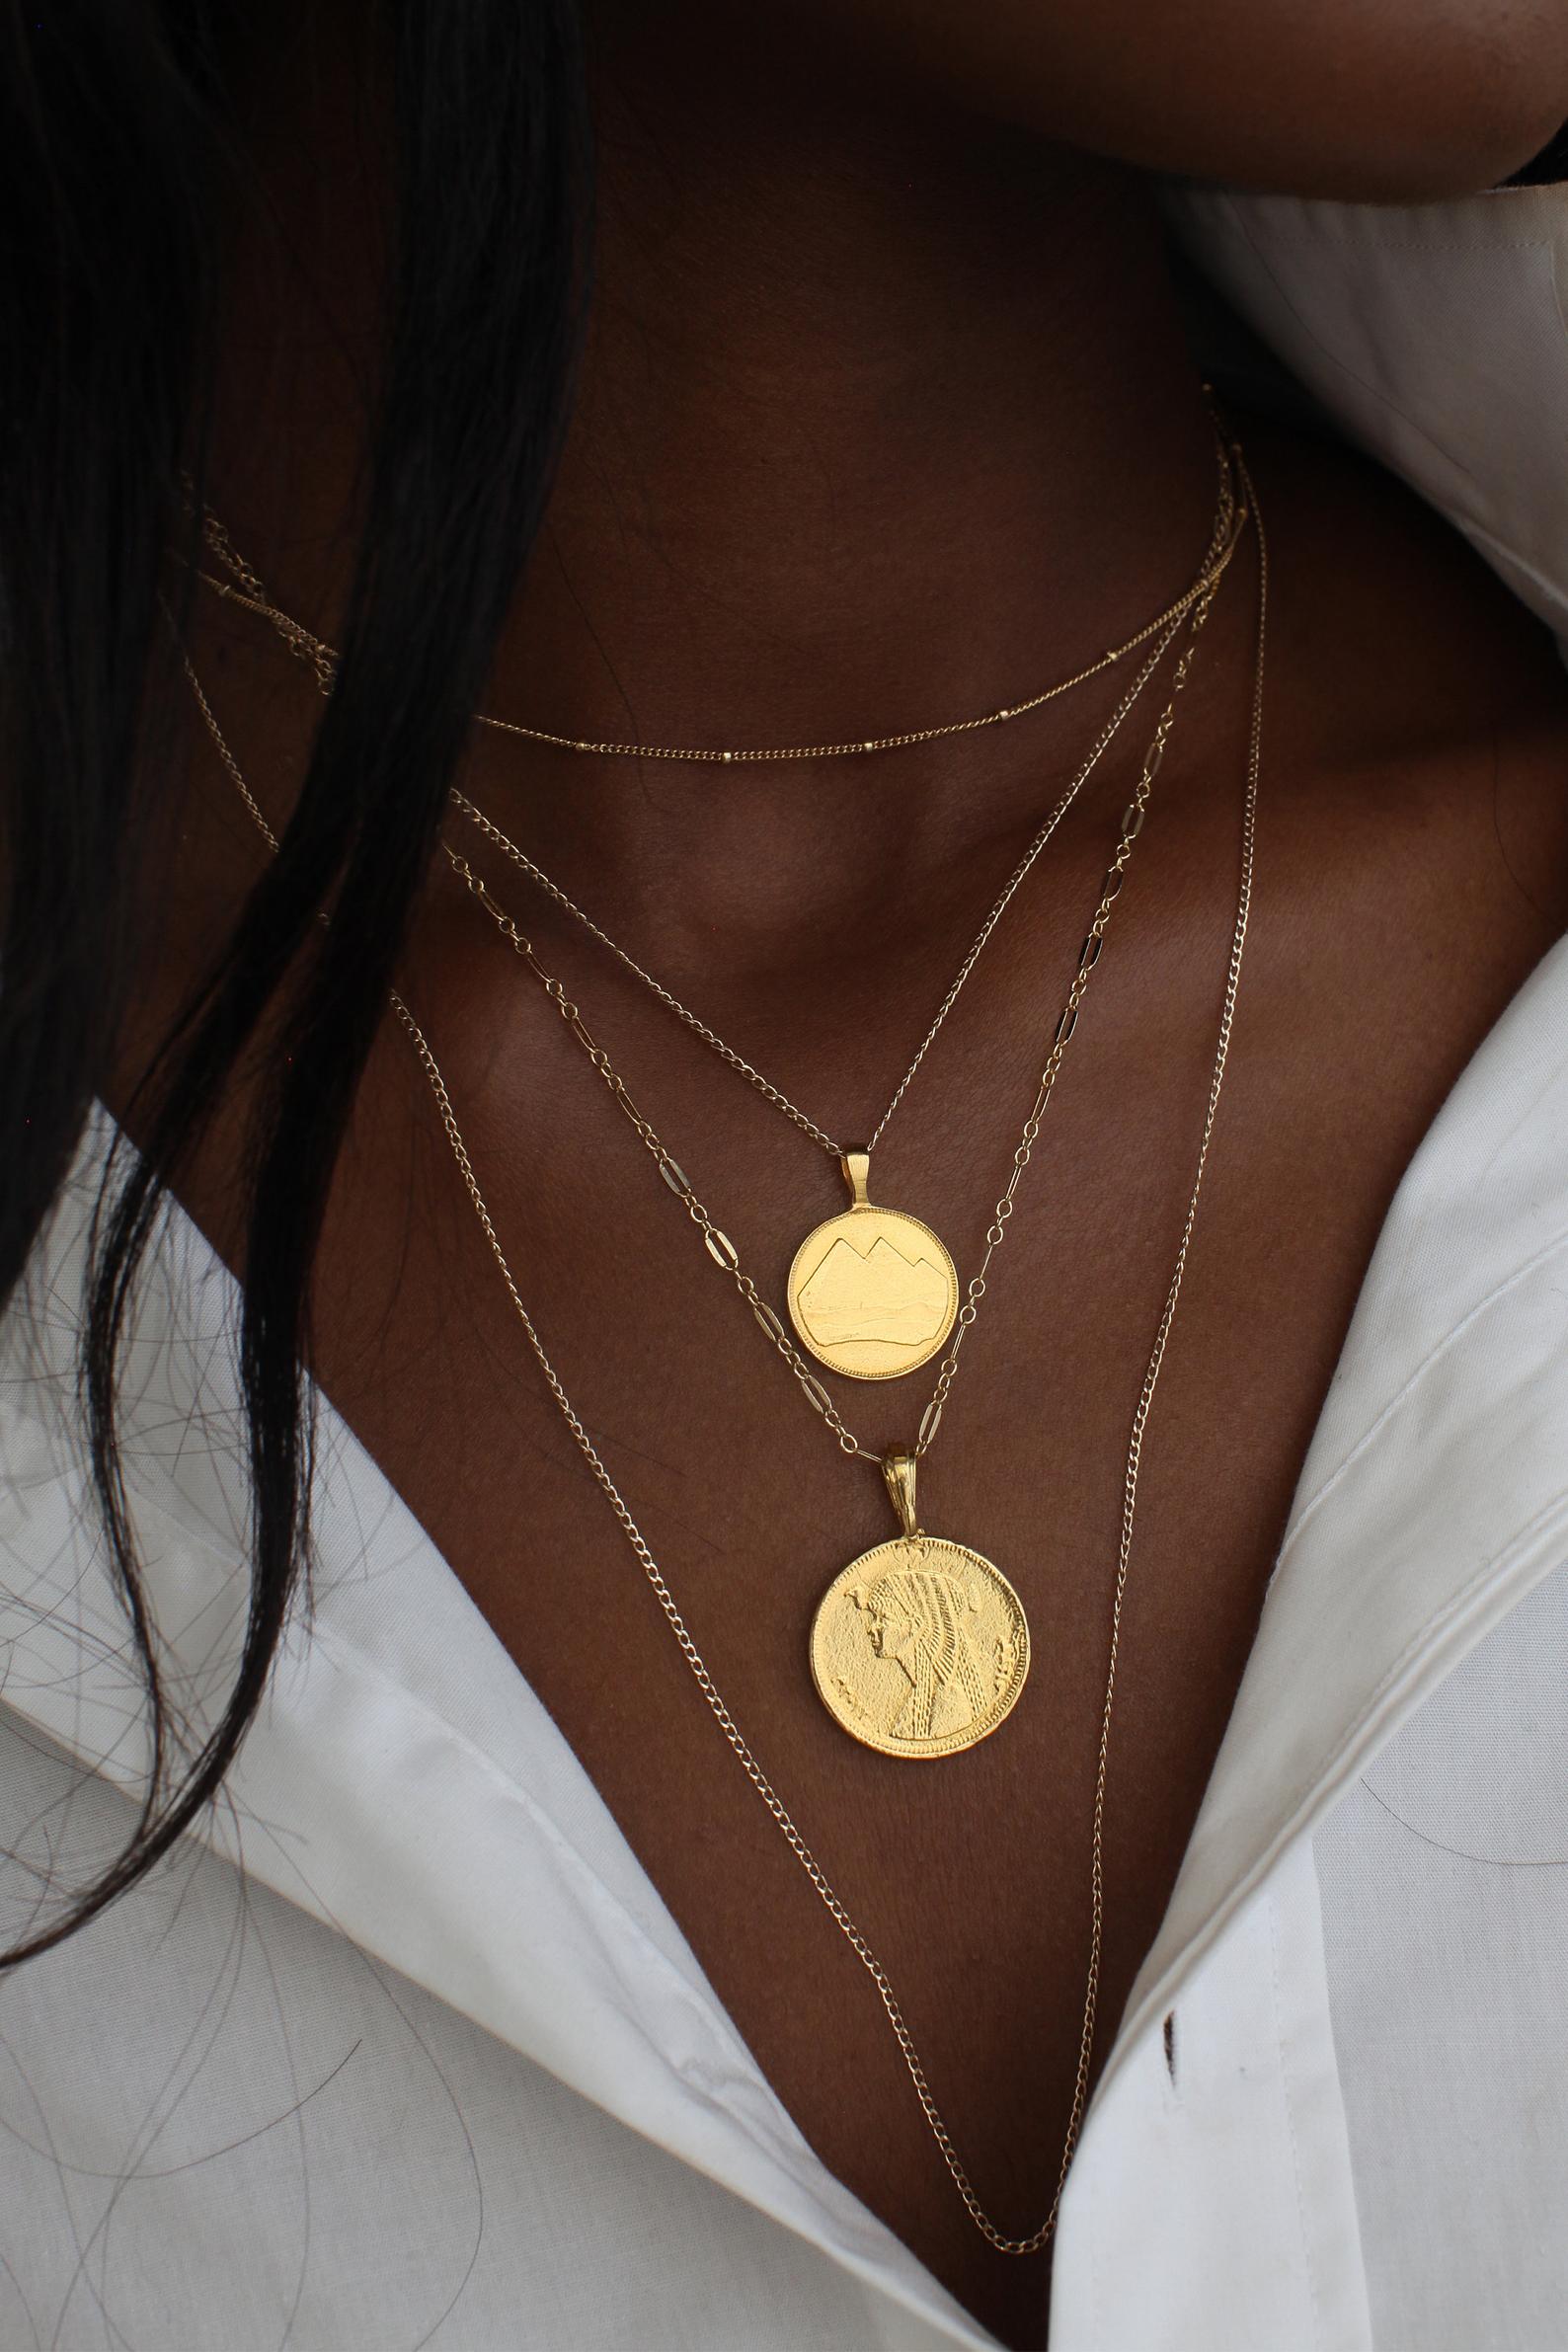 I’m Stepping My Jewelry Game Up With These Etsy Finds by Black Women